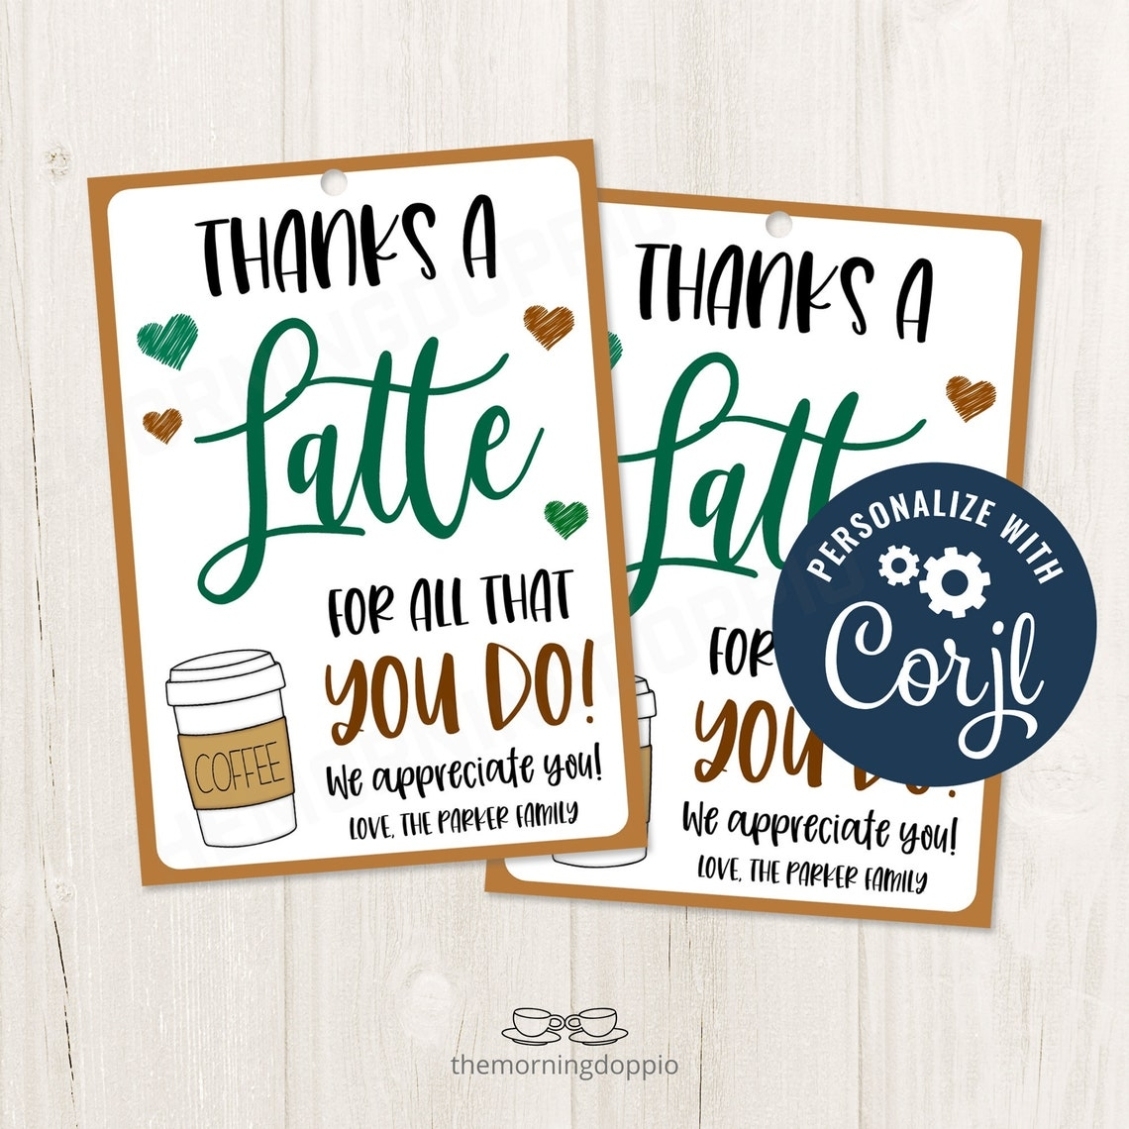 Printable/Editable Thanks A Latte Coffee Gif Tag For Teachers - Etsy Within Thanks A Latte Card Template